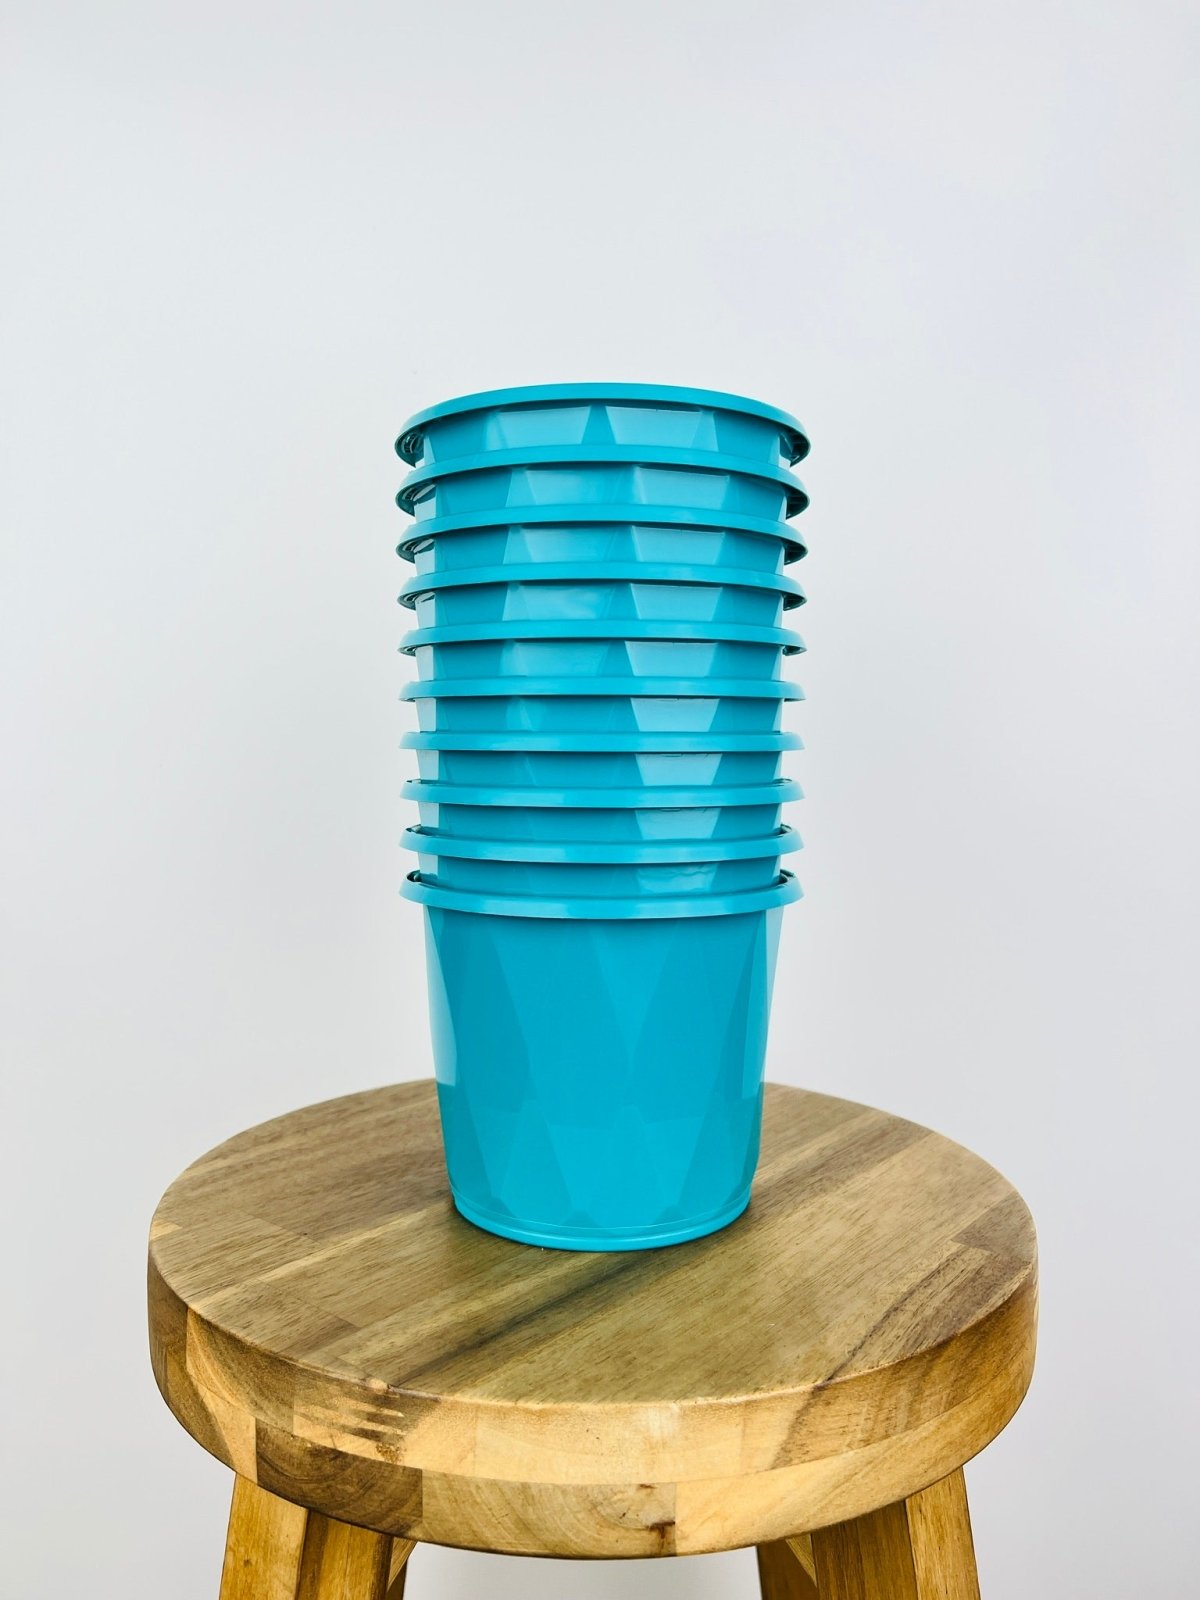 Impulse Pot 130mm - Teal - 10 Pack | Uprooted